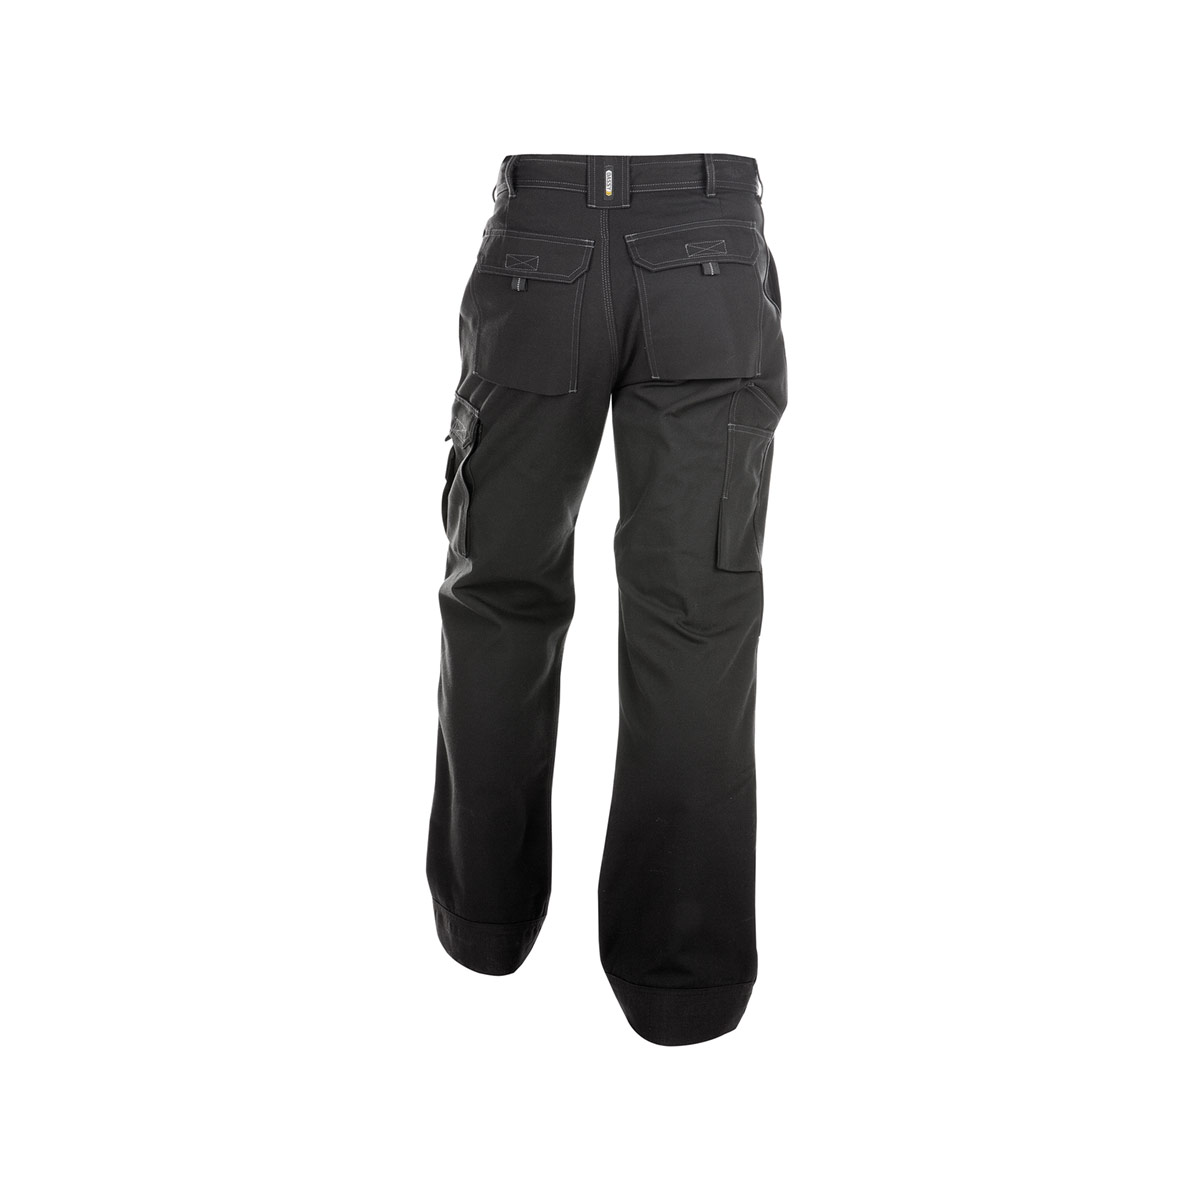 DASSY Jackson canvas work trousers with knee pad pockets